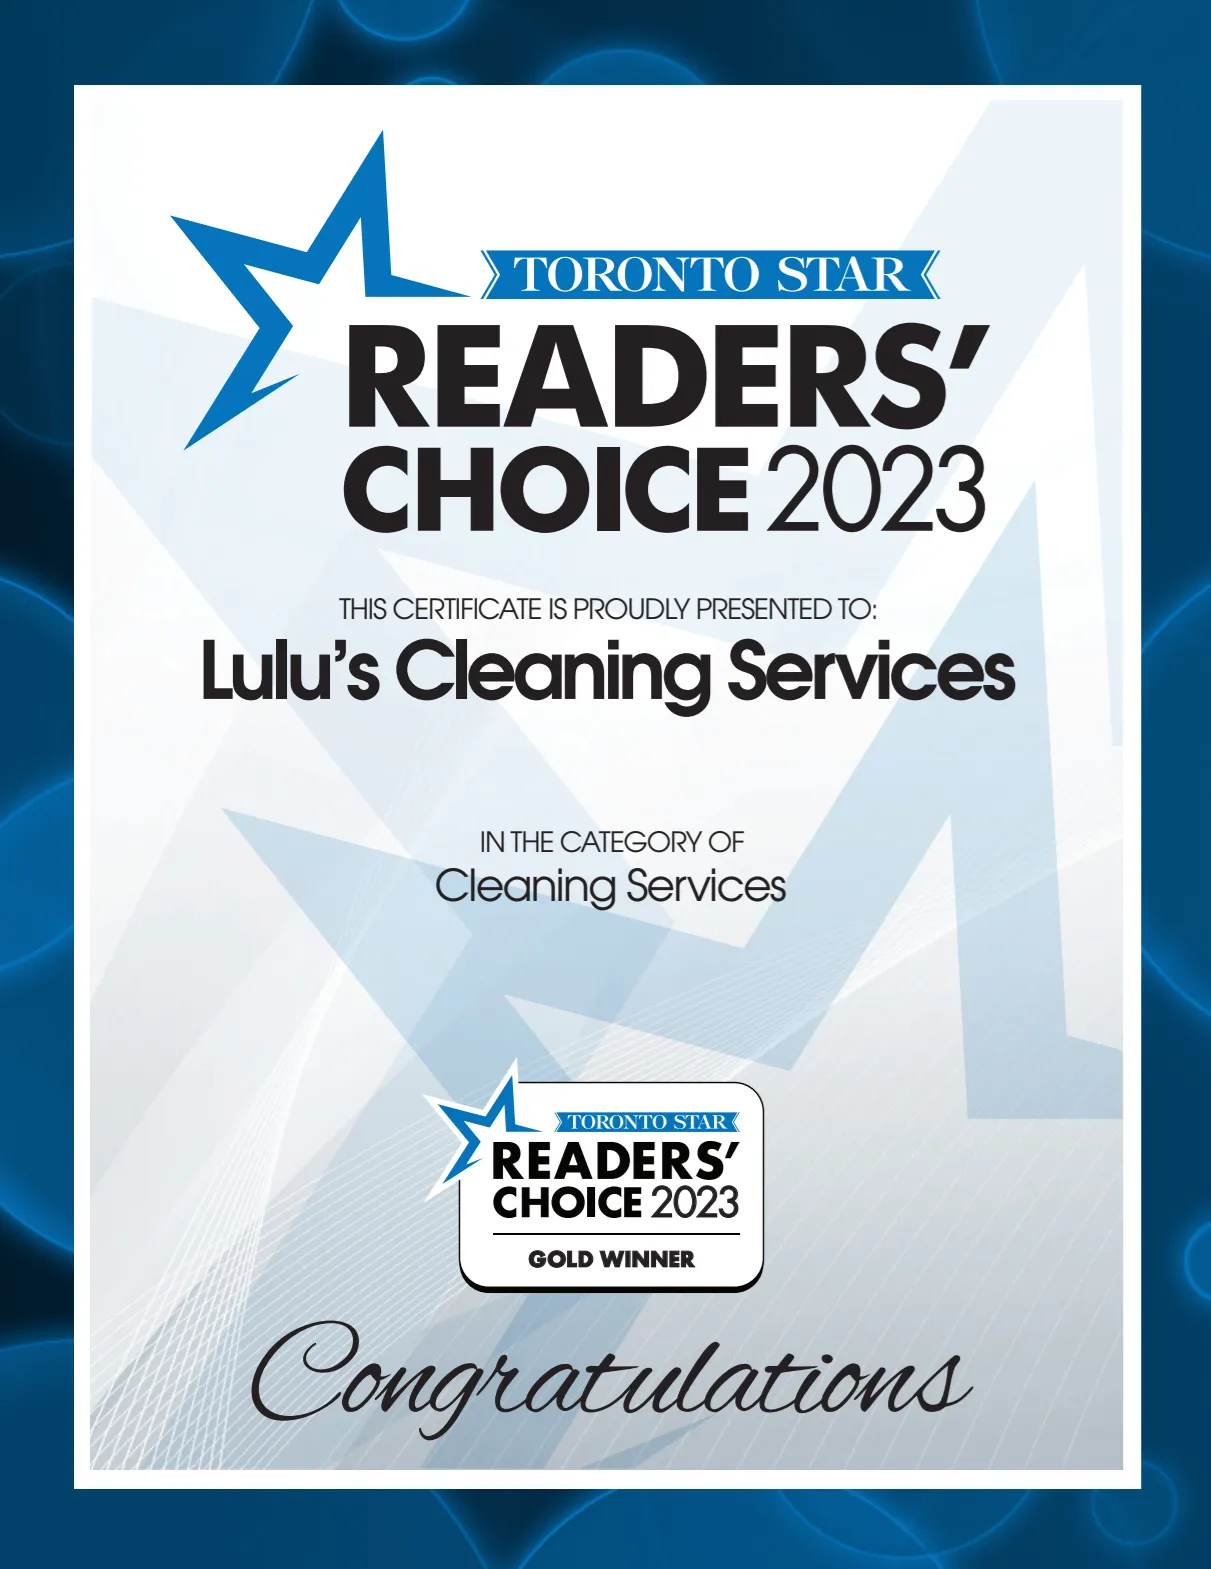 Lulu's Cleaning Services team in action, delivering top-tier cleanliness to a Toronto home